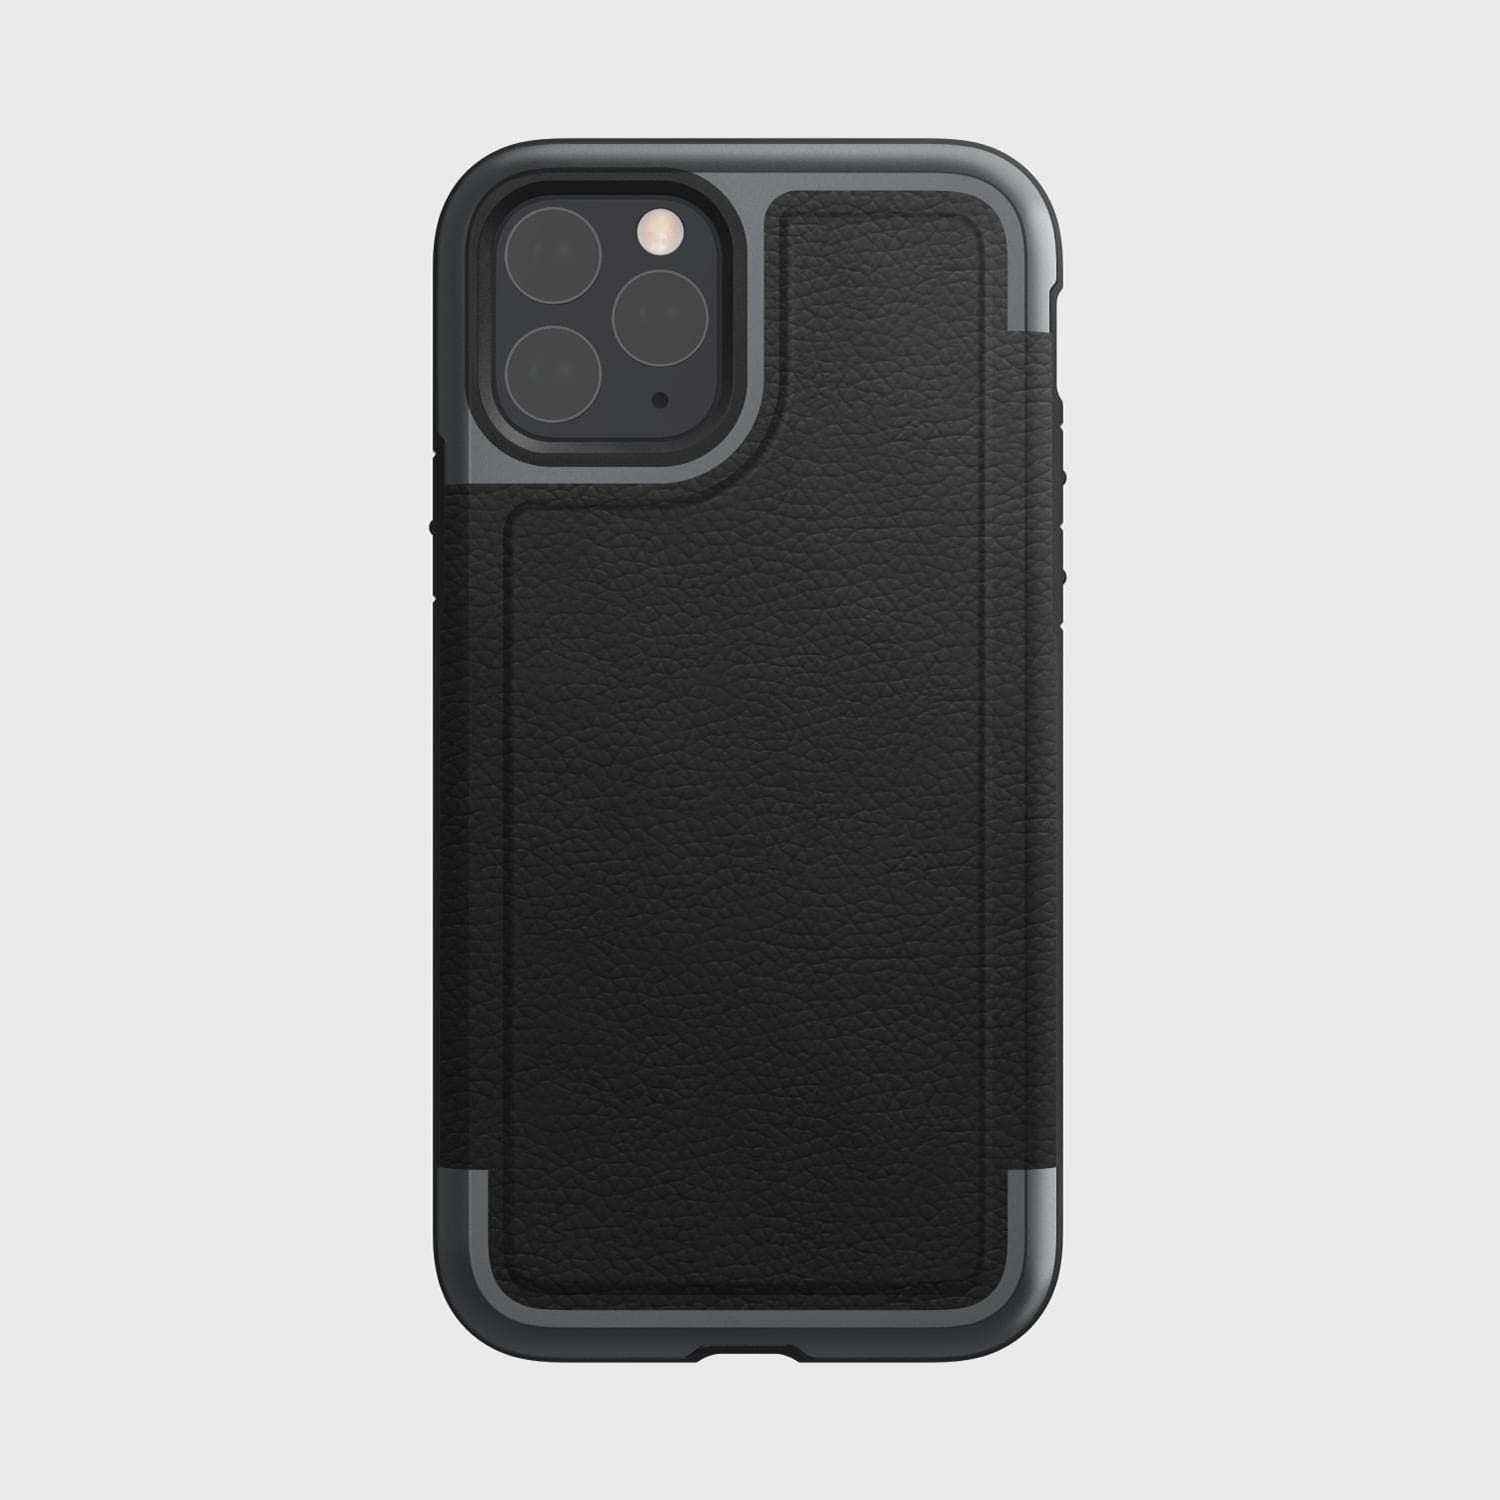 The black Raptic iPhone 11 Pro Case - Prime is shown on a white background.